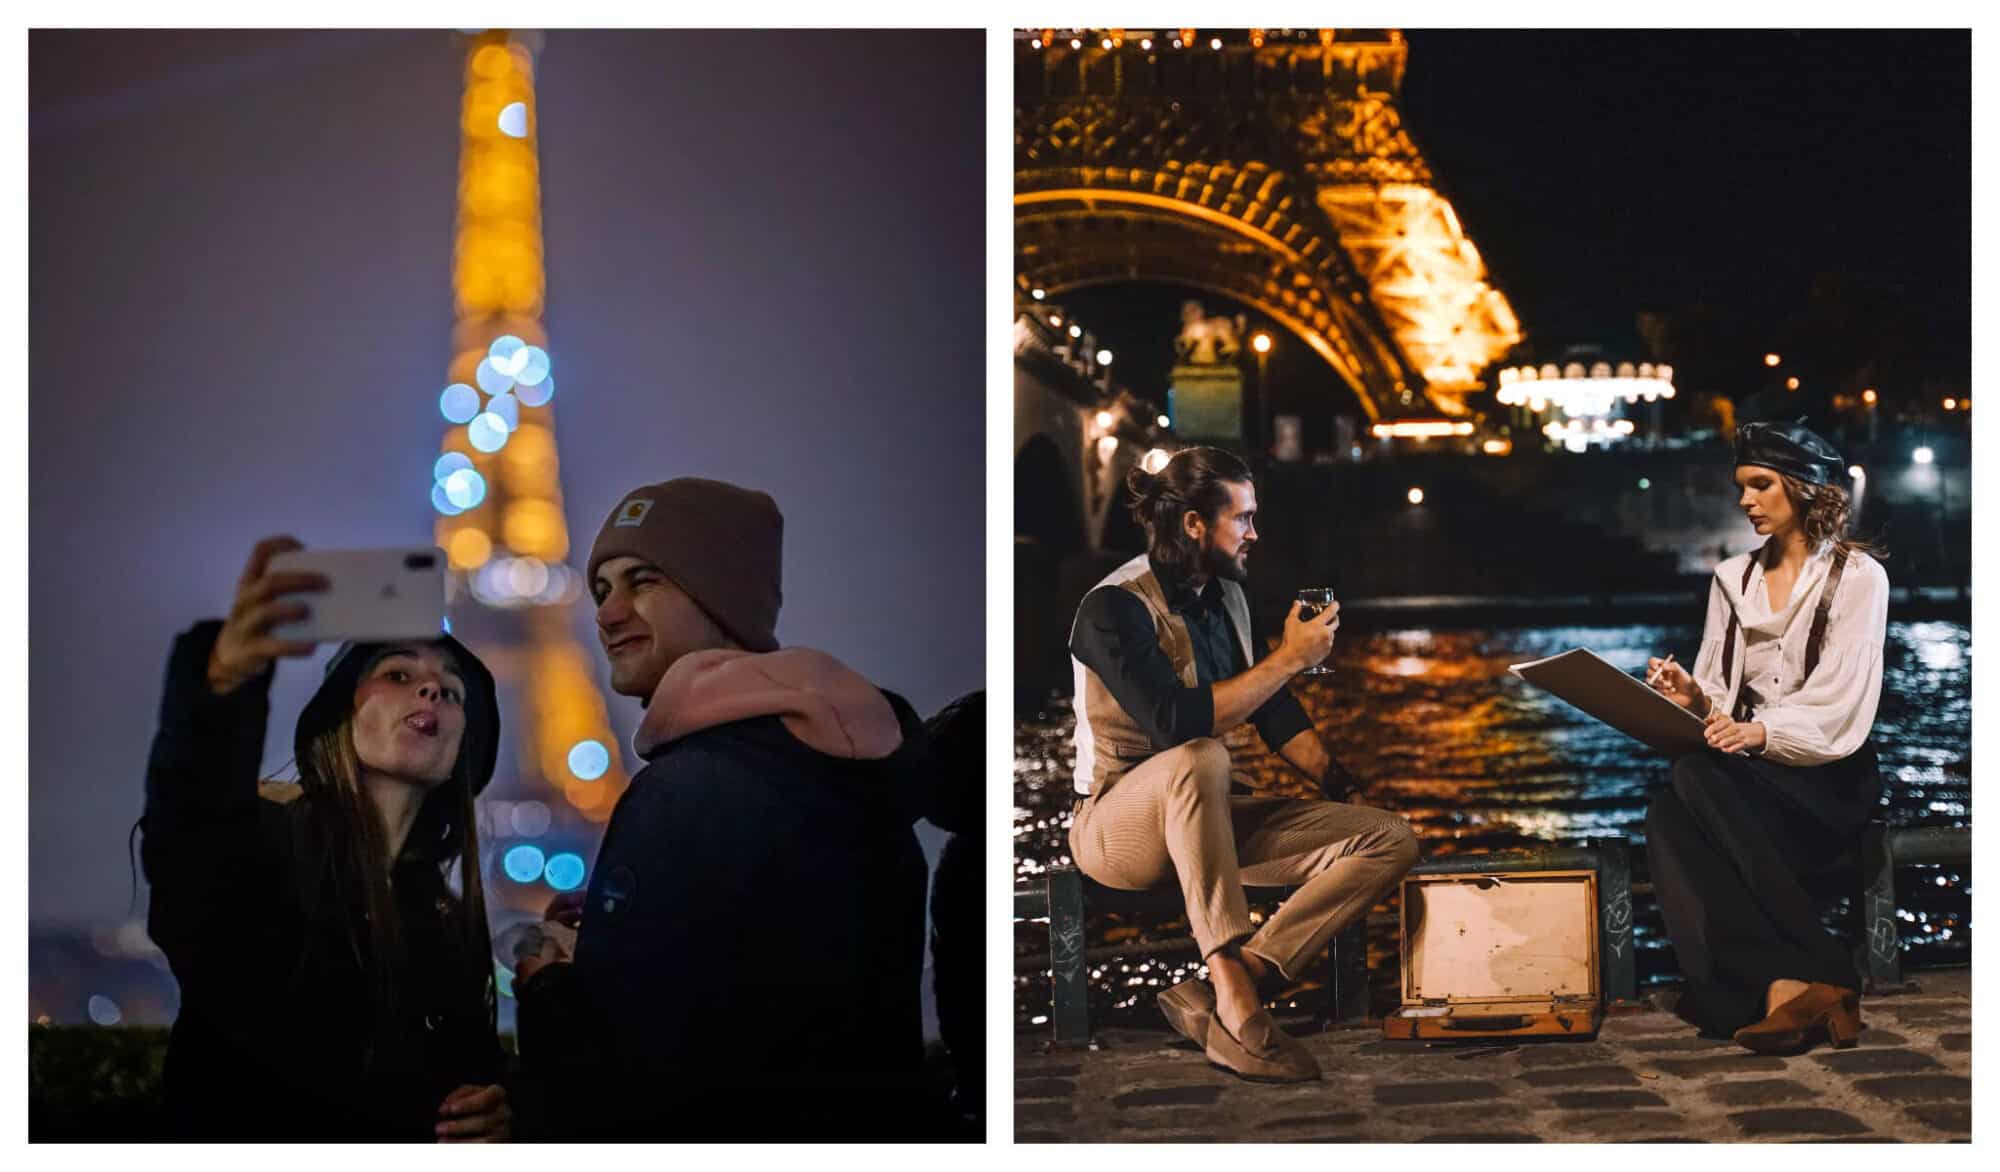 Left: Young Parisians pose for a selfie in front of the Eiffel Tower at night; Right: A Parisian male poses at night while his female companion sketches him with the Eiffel Tower lit up in the background. 